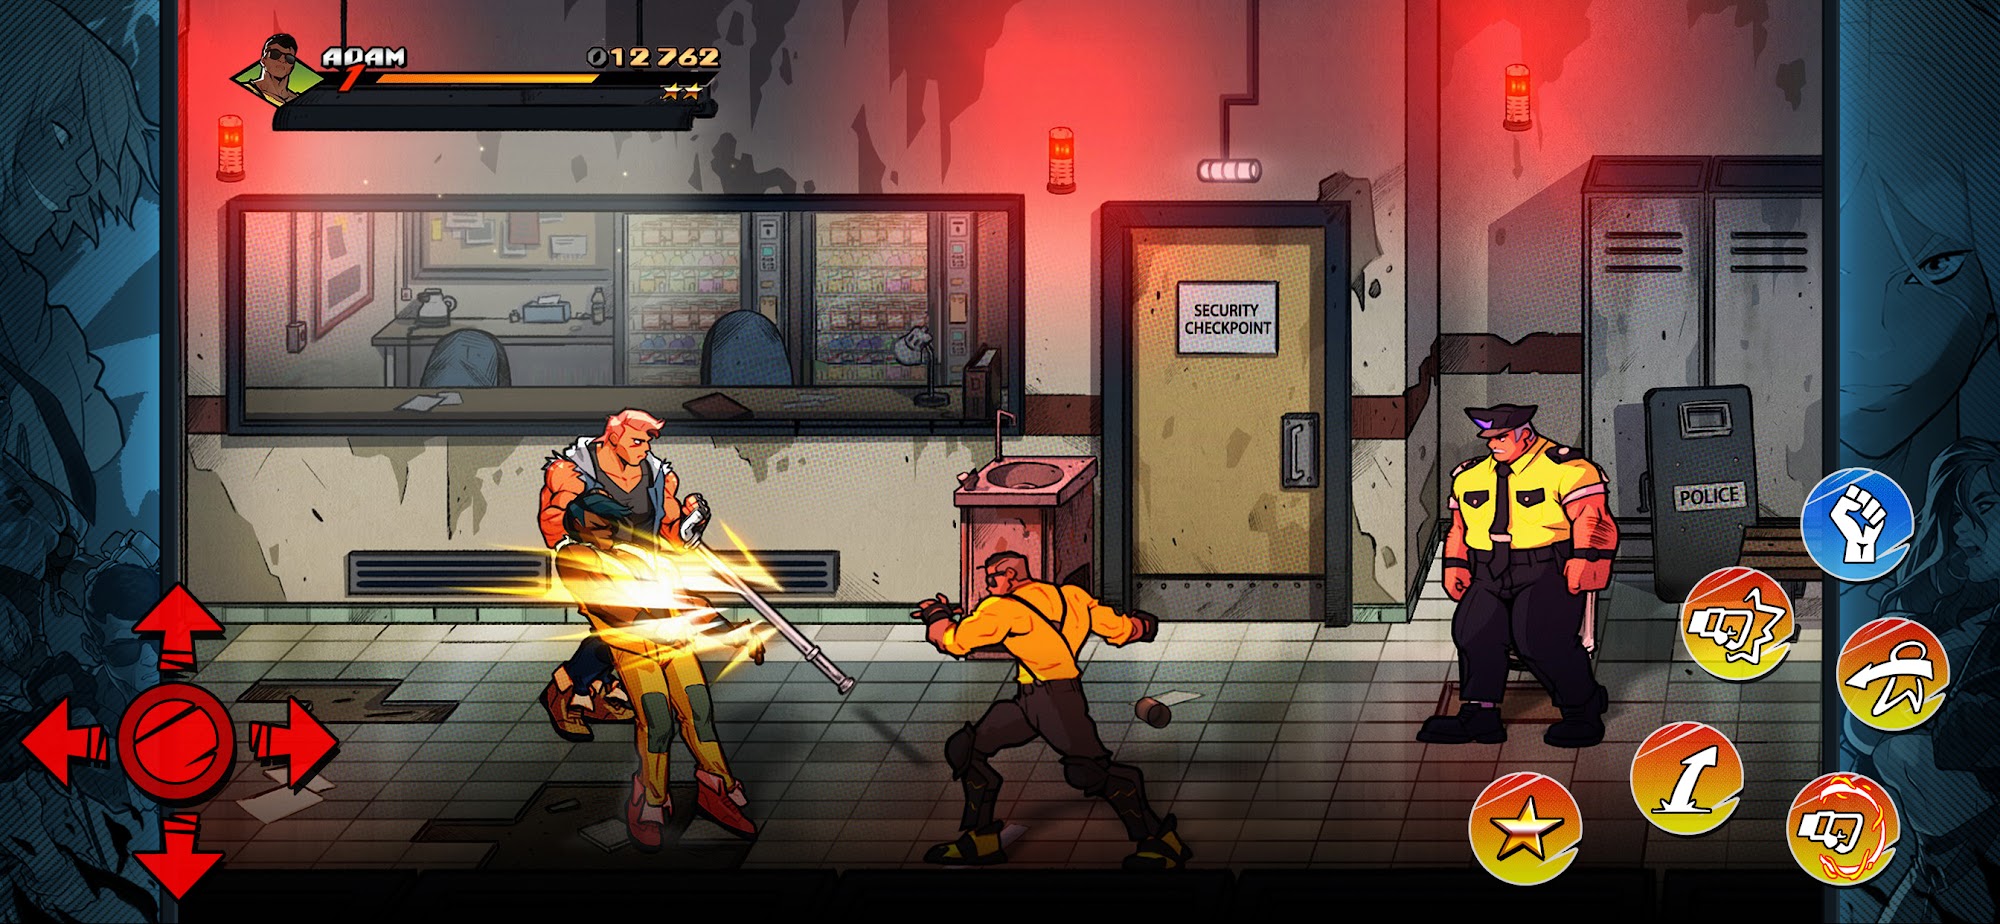 Gameplay of the Streets of Rage 4 for Android phone or tablet.